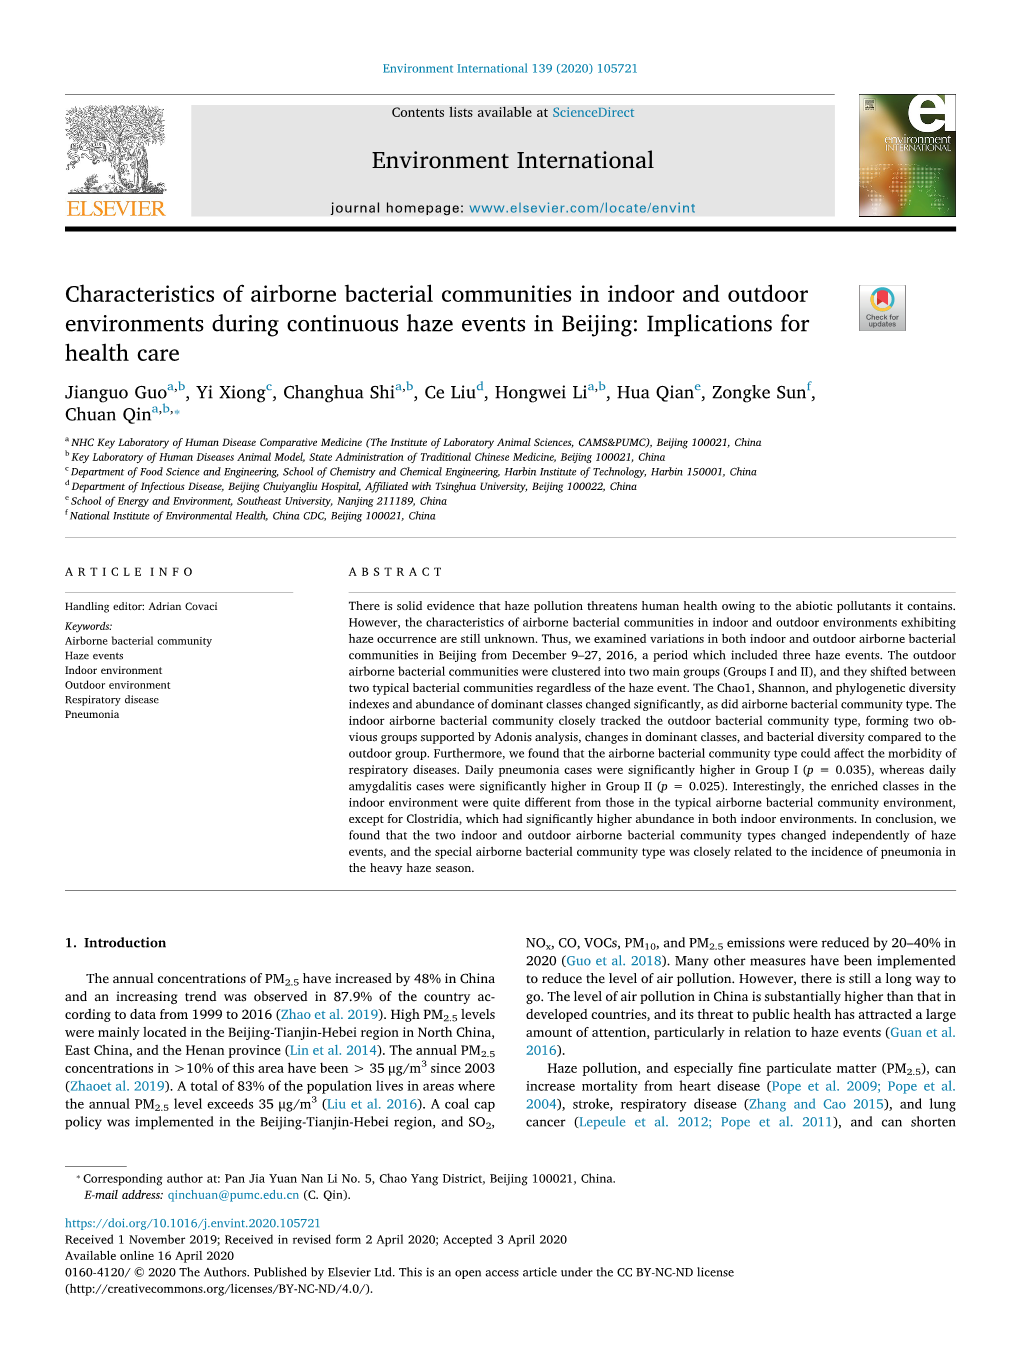 Characteristics of Airborne Bacterial Communities in Indoor and Outdoor Environments During Continuous Haze Events in Beijing I